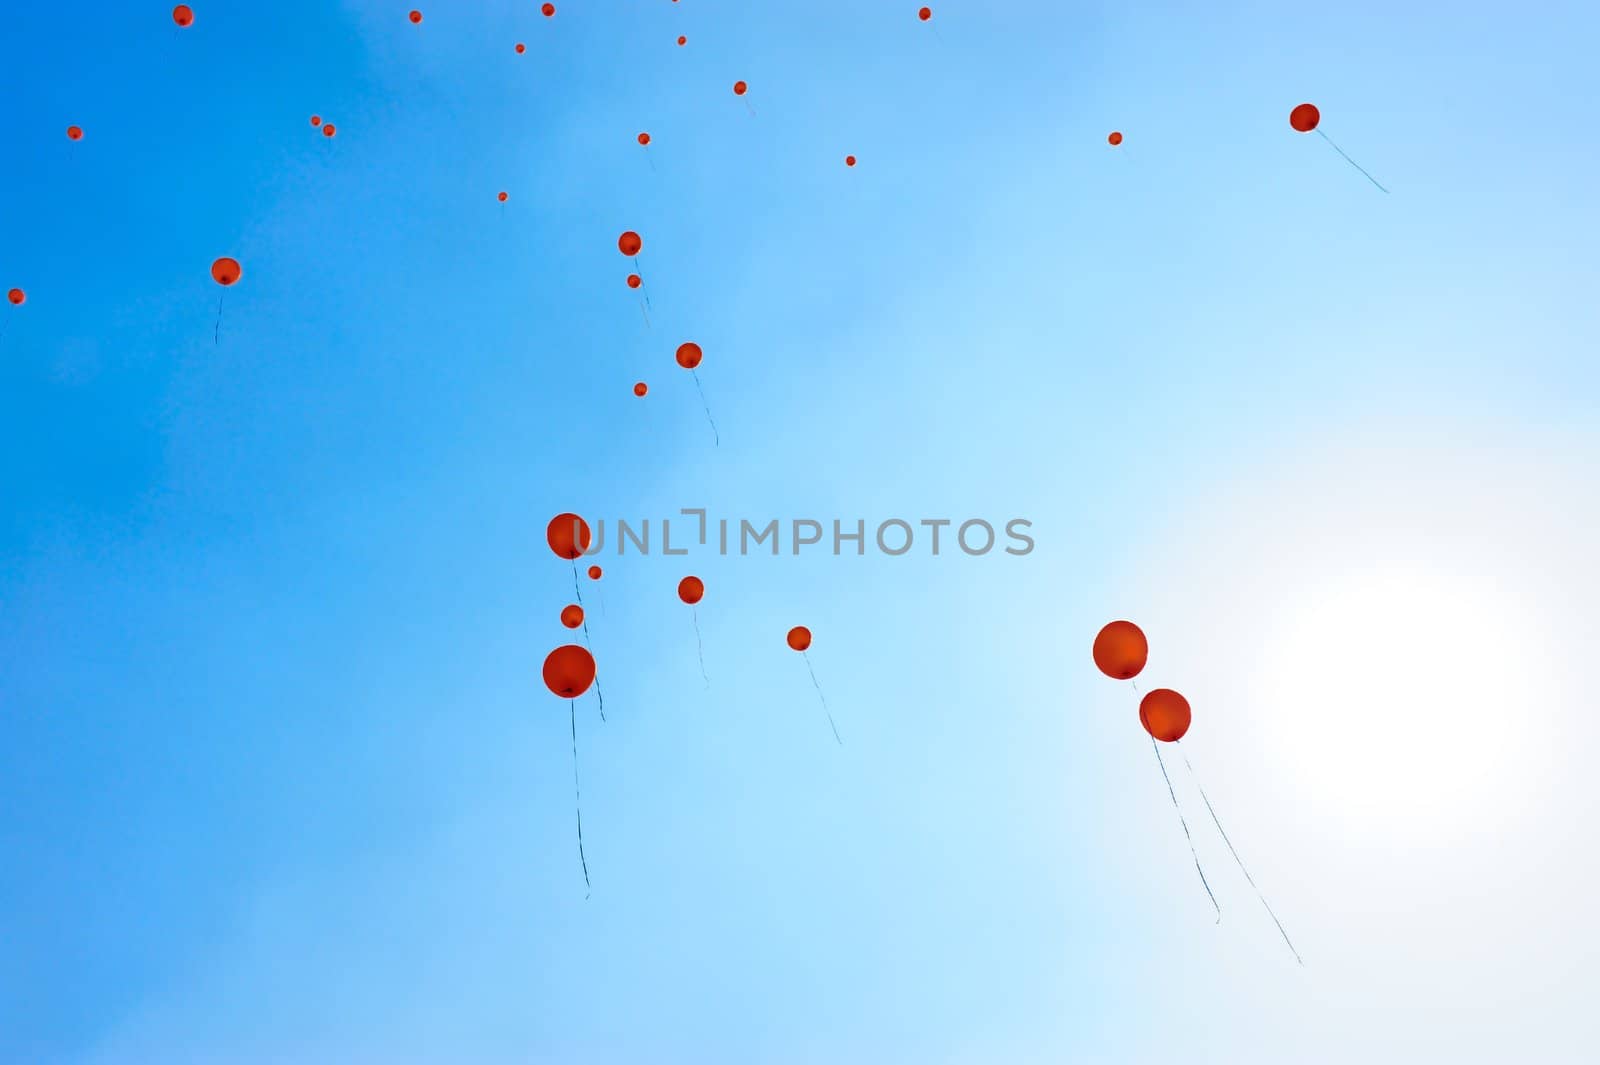 Balloons by raywoo